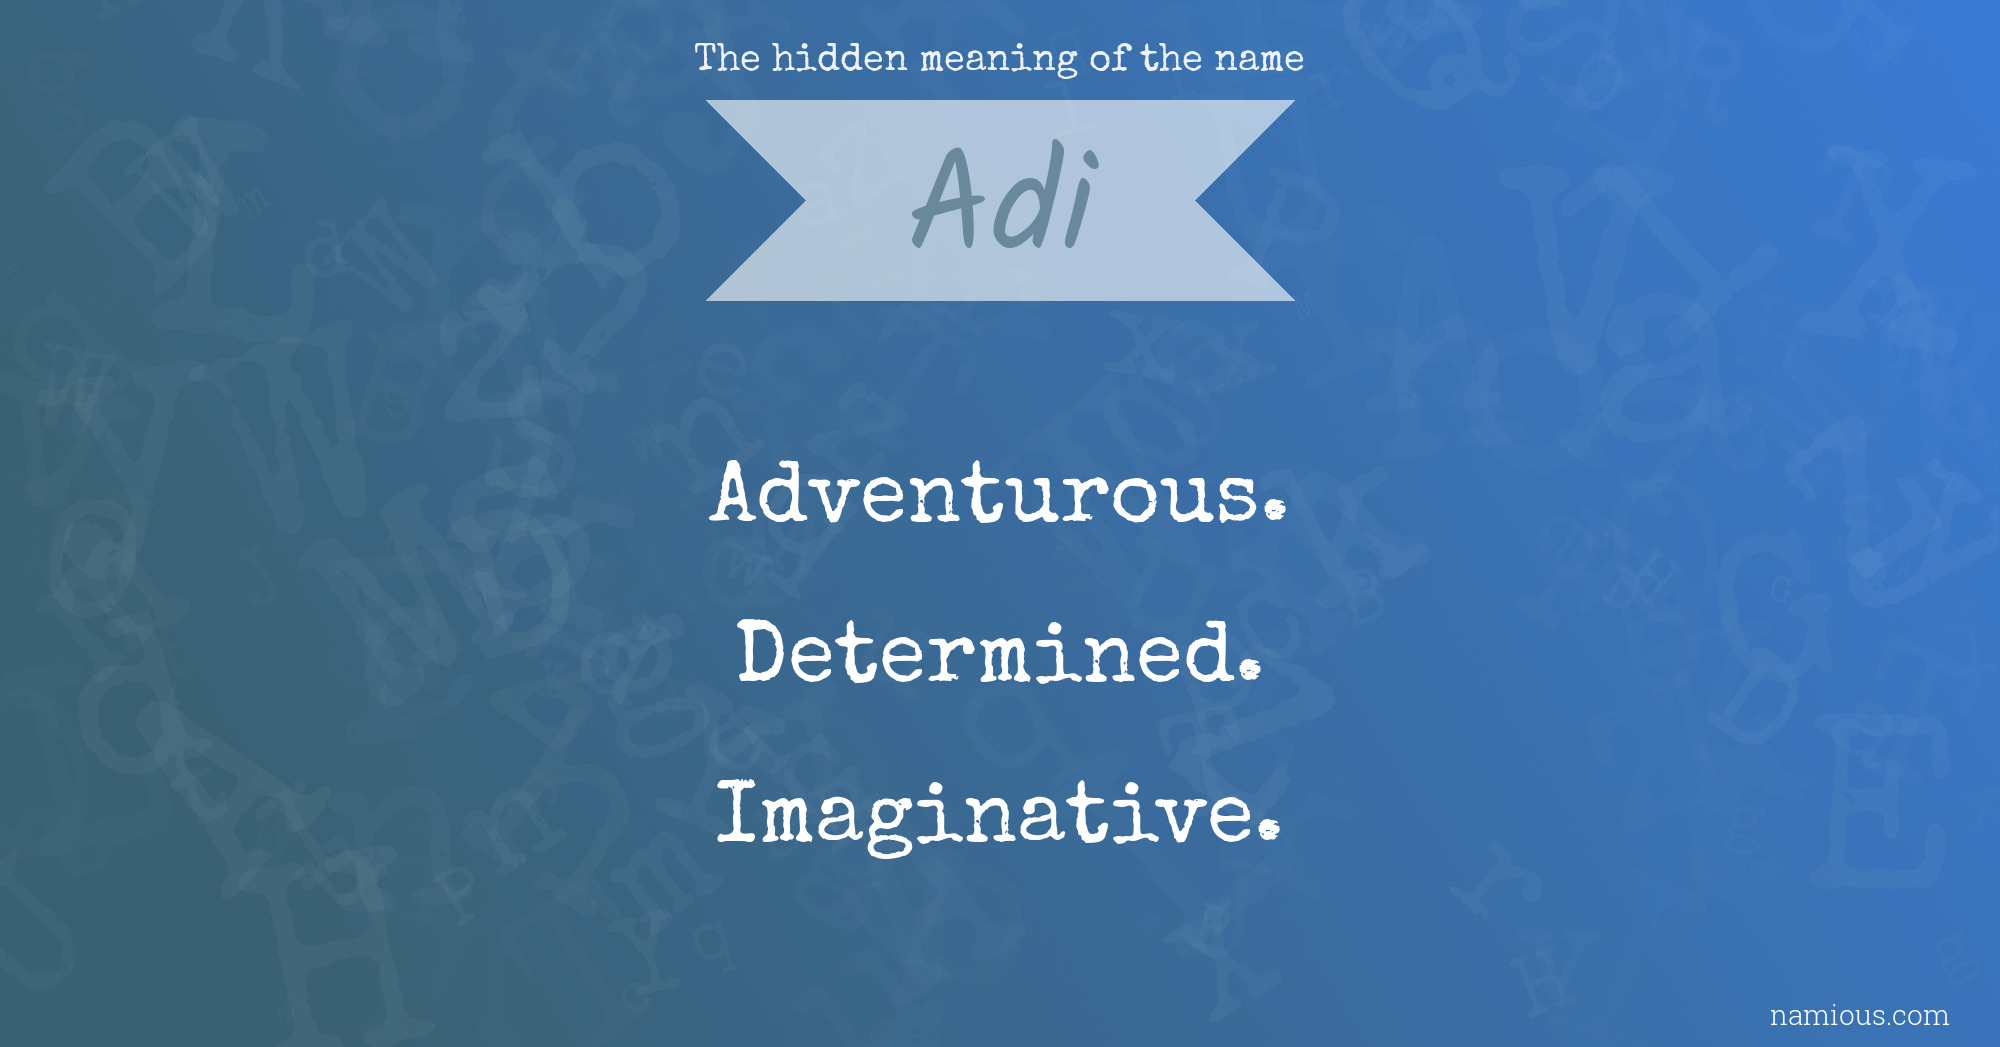 The hidden meaning of the name Adi